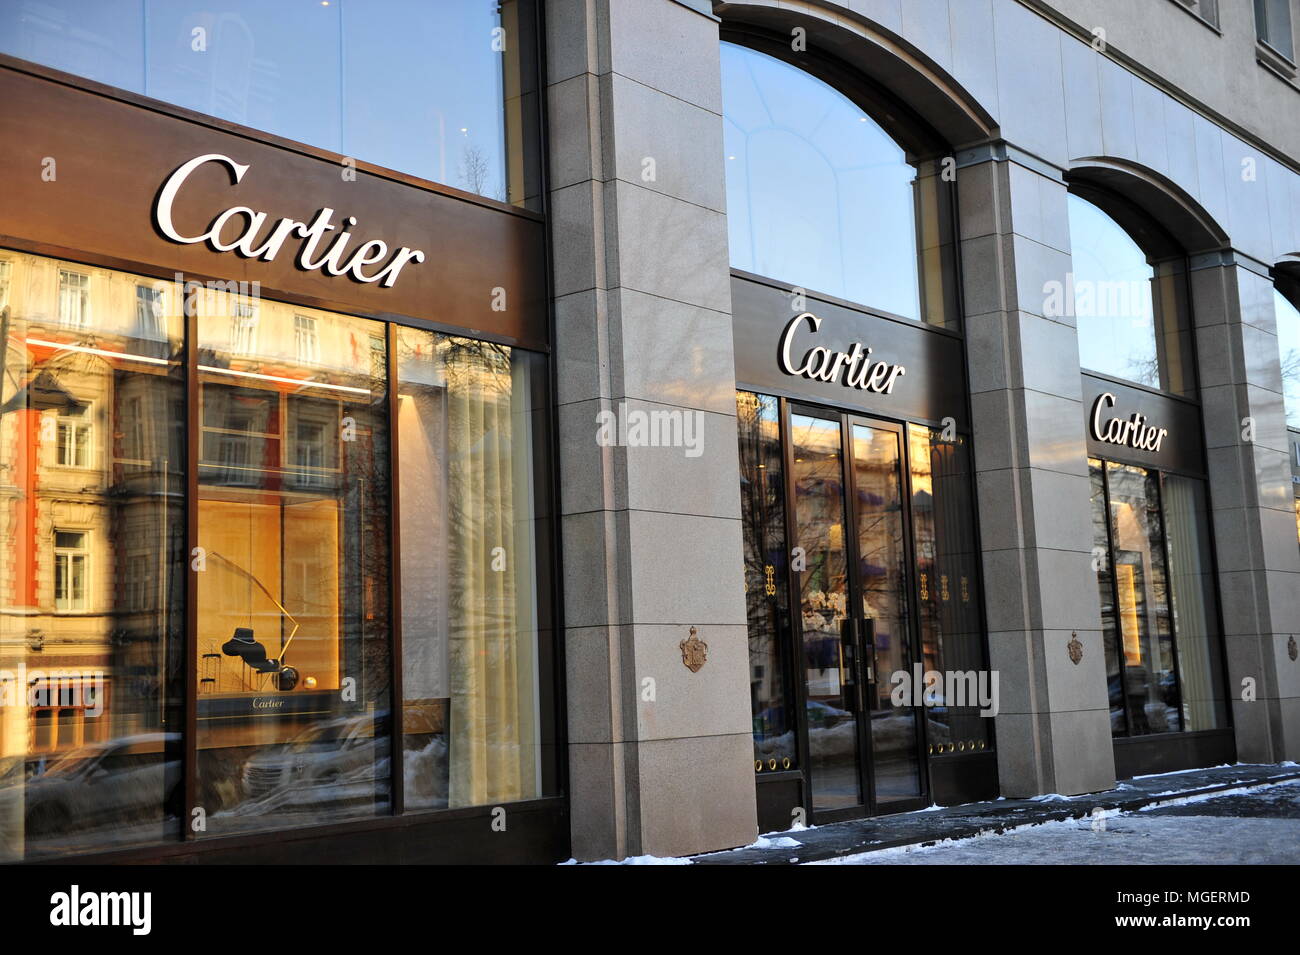 cartier outlet store locations